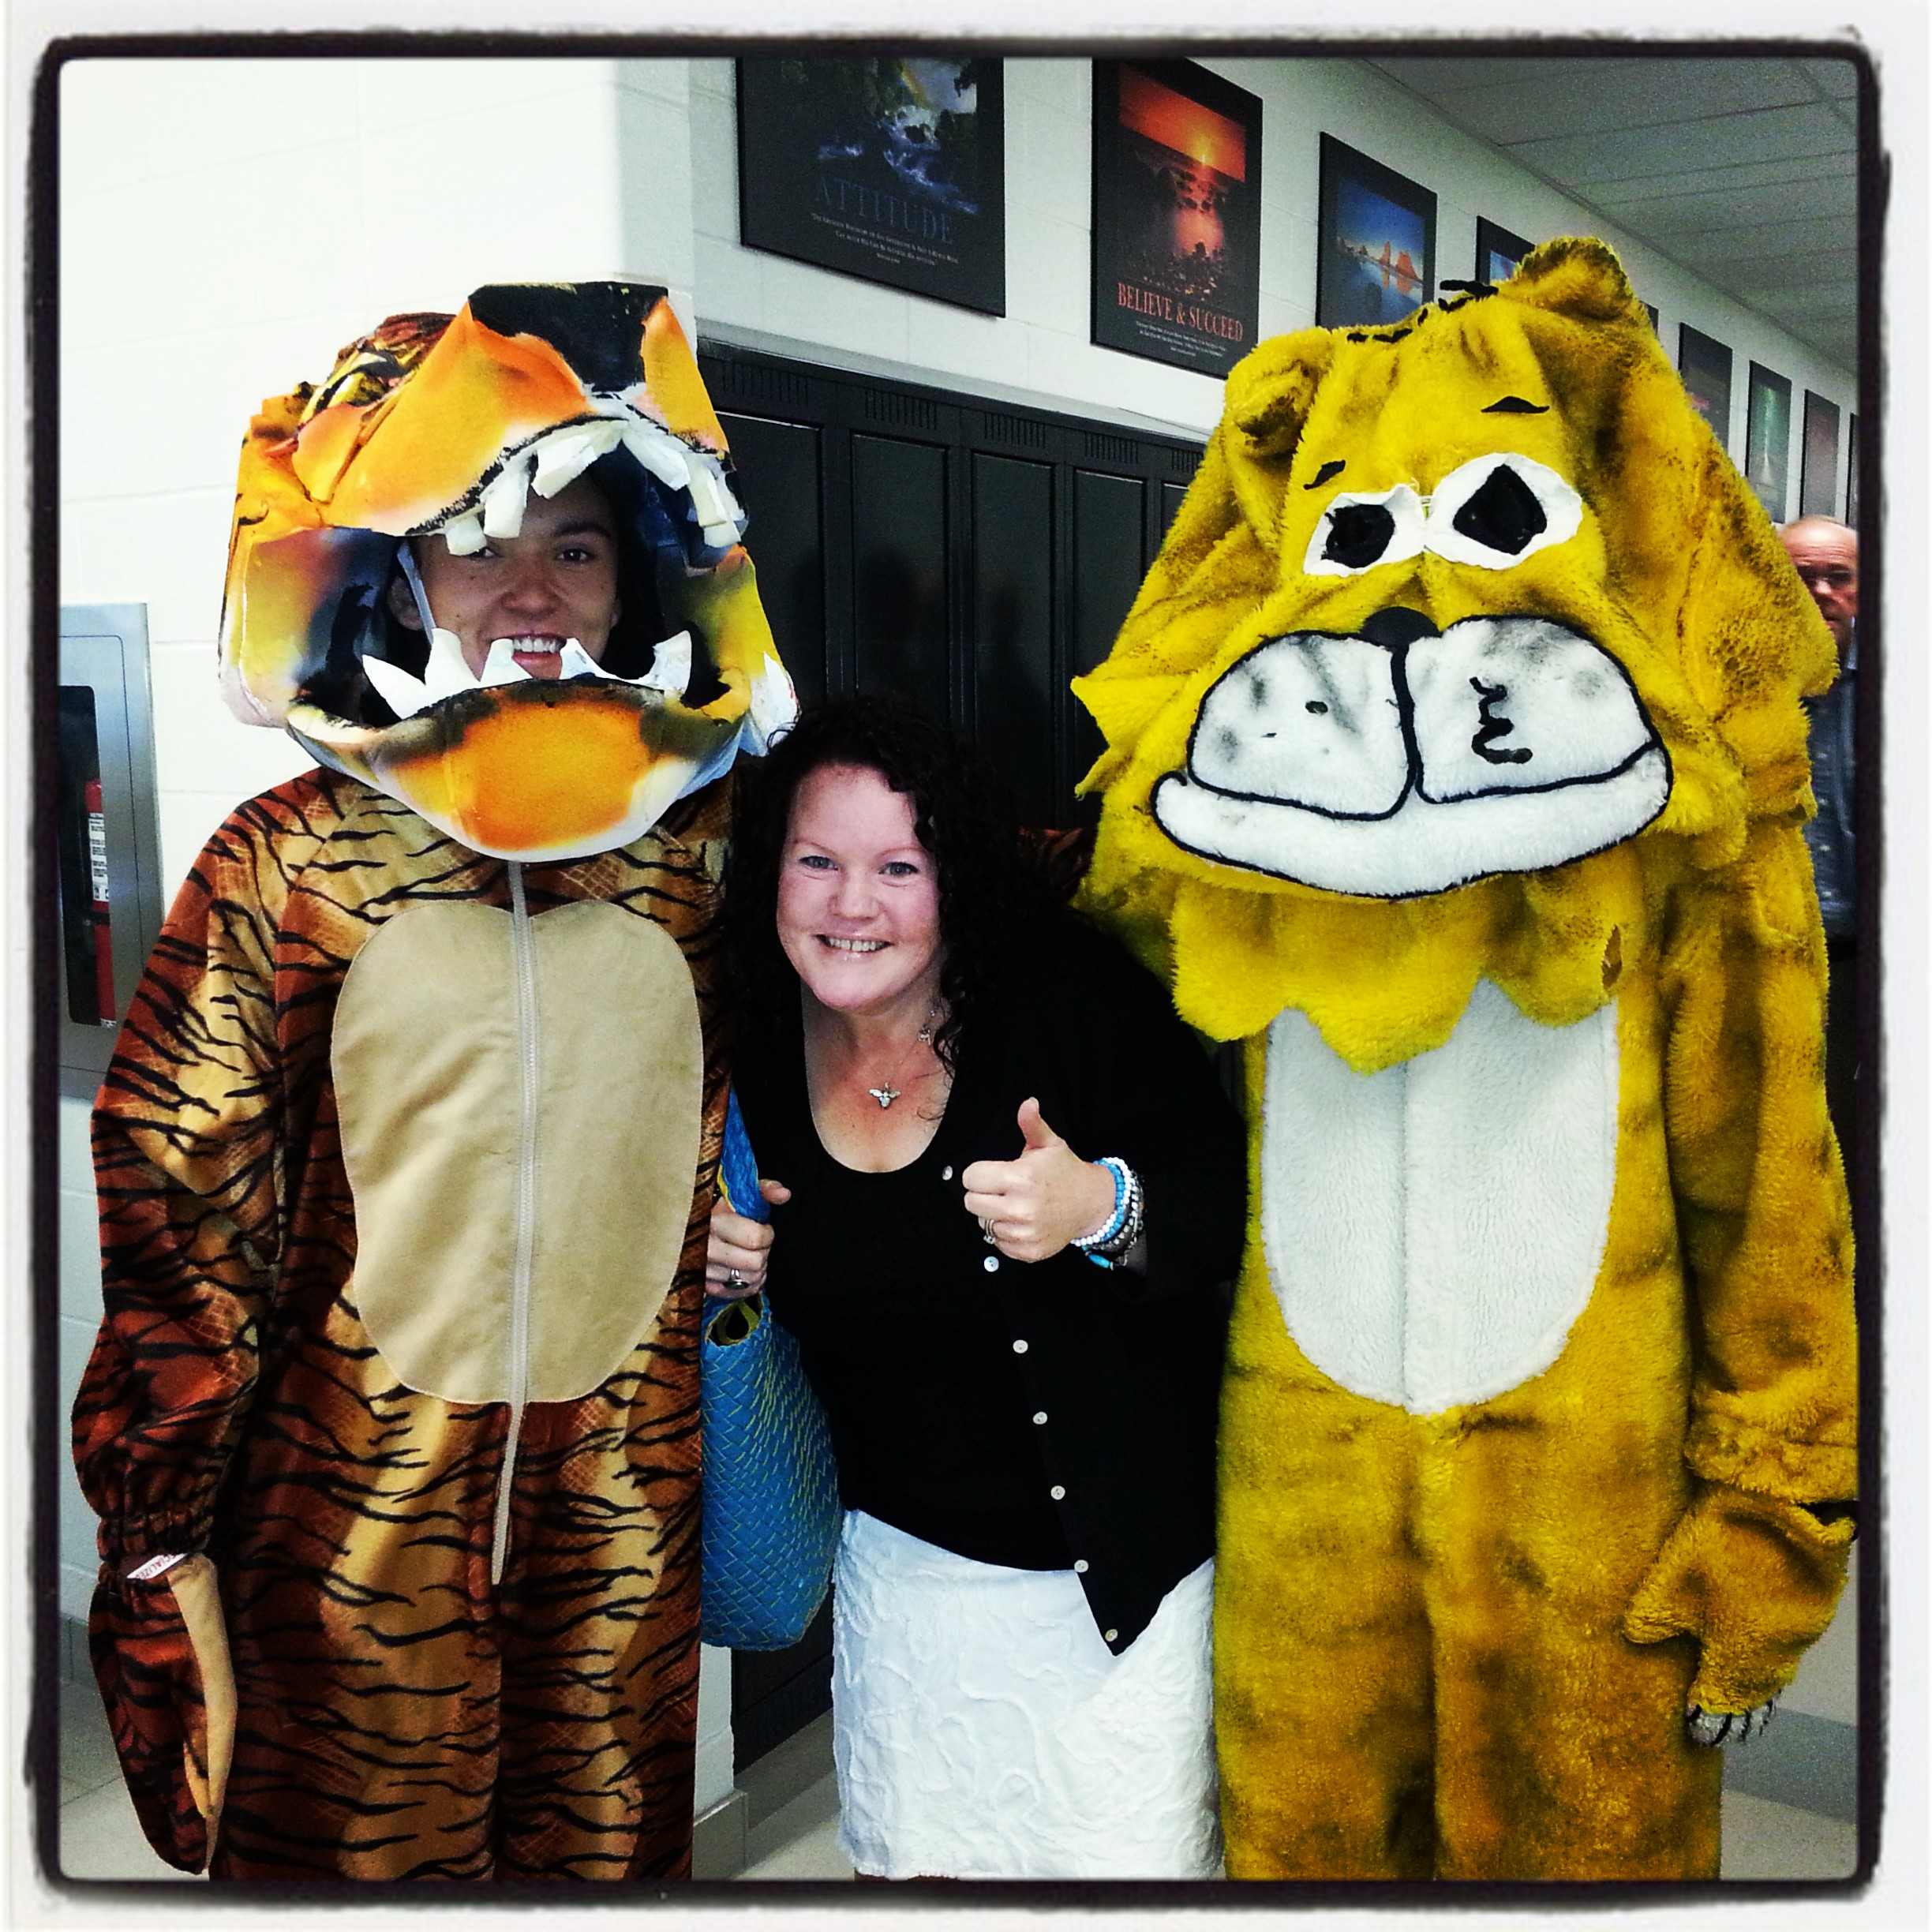 (Click to magnify) New tiger (left), old tiger (right) and Jennifer Crothers in the middle.